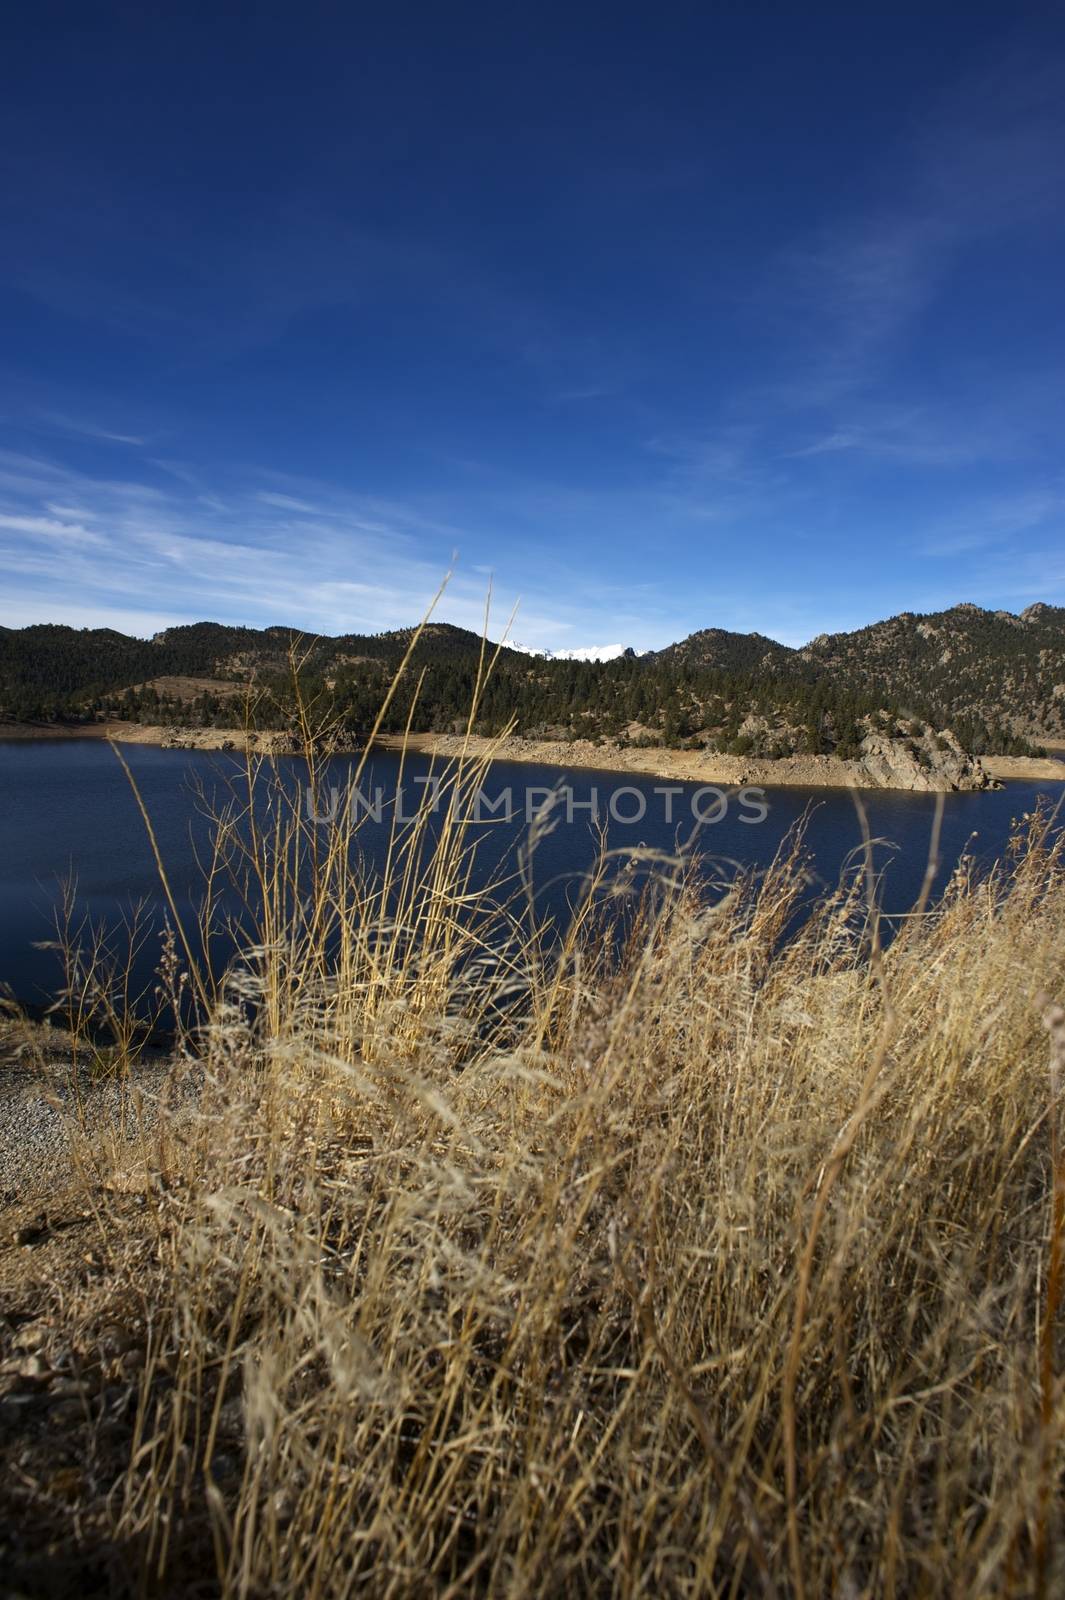 Dry Colorado Grasslands and Water Reservoir  - Late Fall in Colorado. Gross Reservoir.